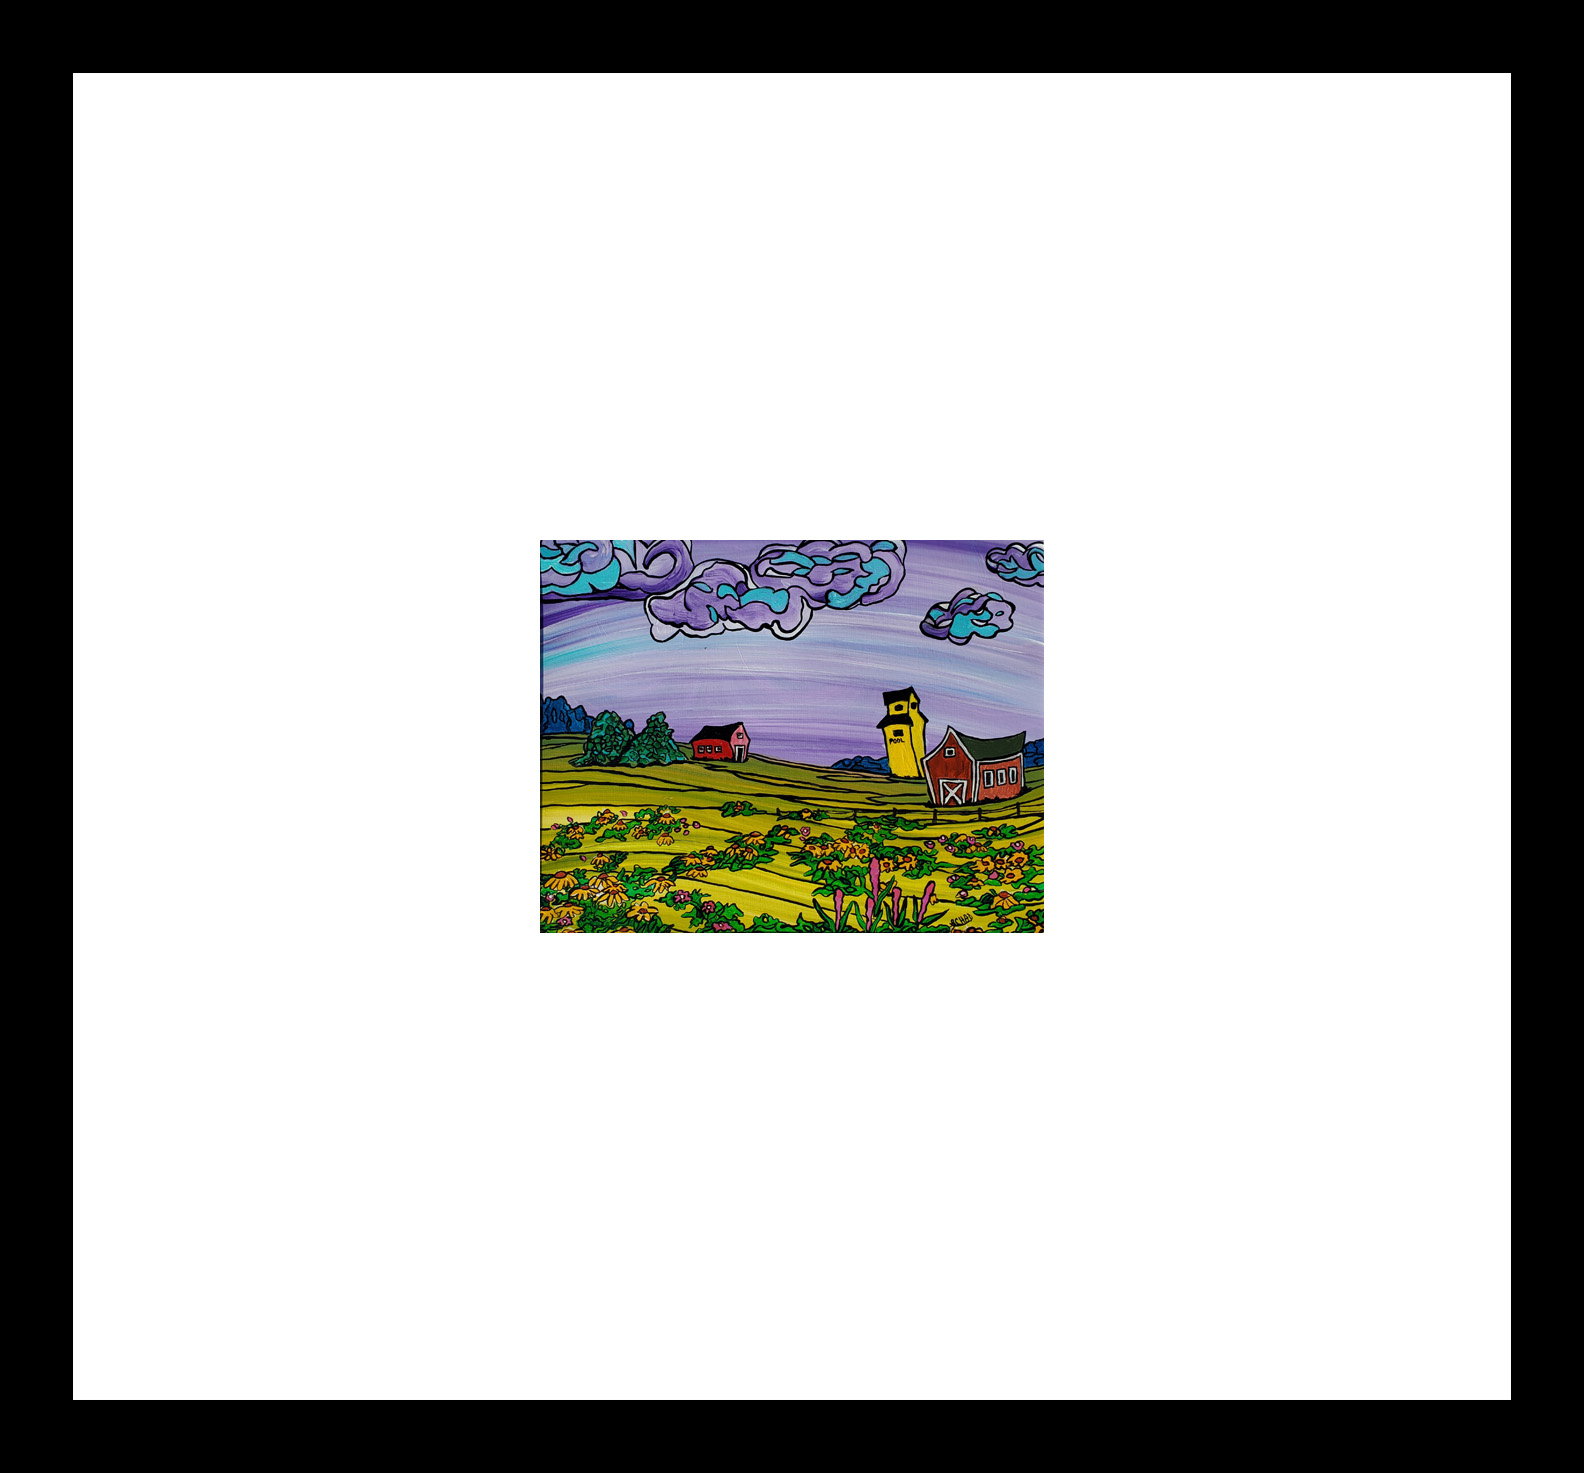 2019-14 "Prairie Flowers"
Image: 9.5" x 7.5"
Framed: 20" x 20"
Acrylic on 246 lb paper
SOLD